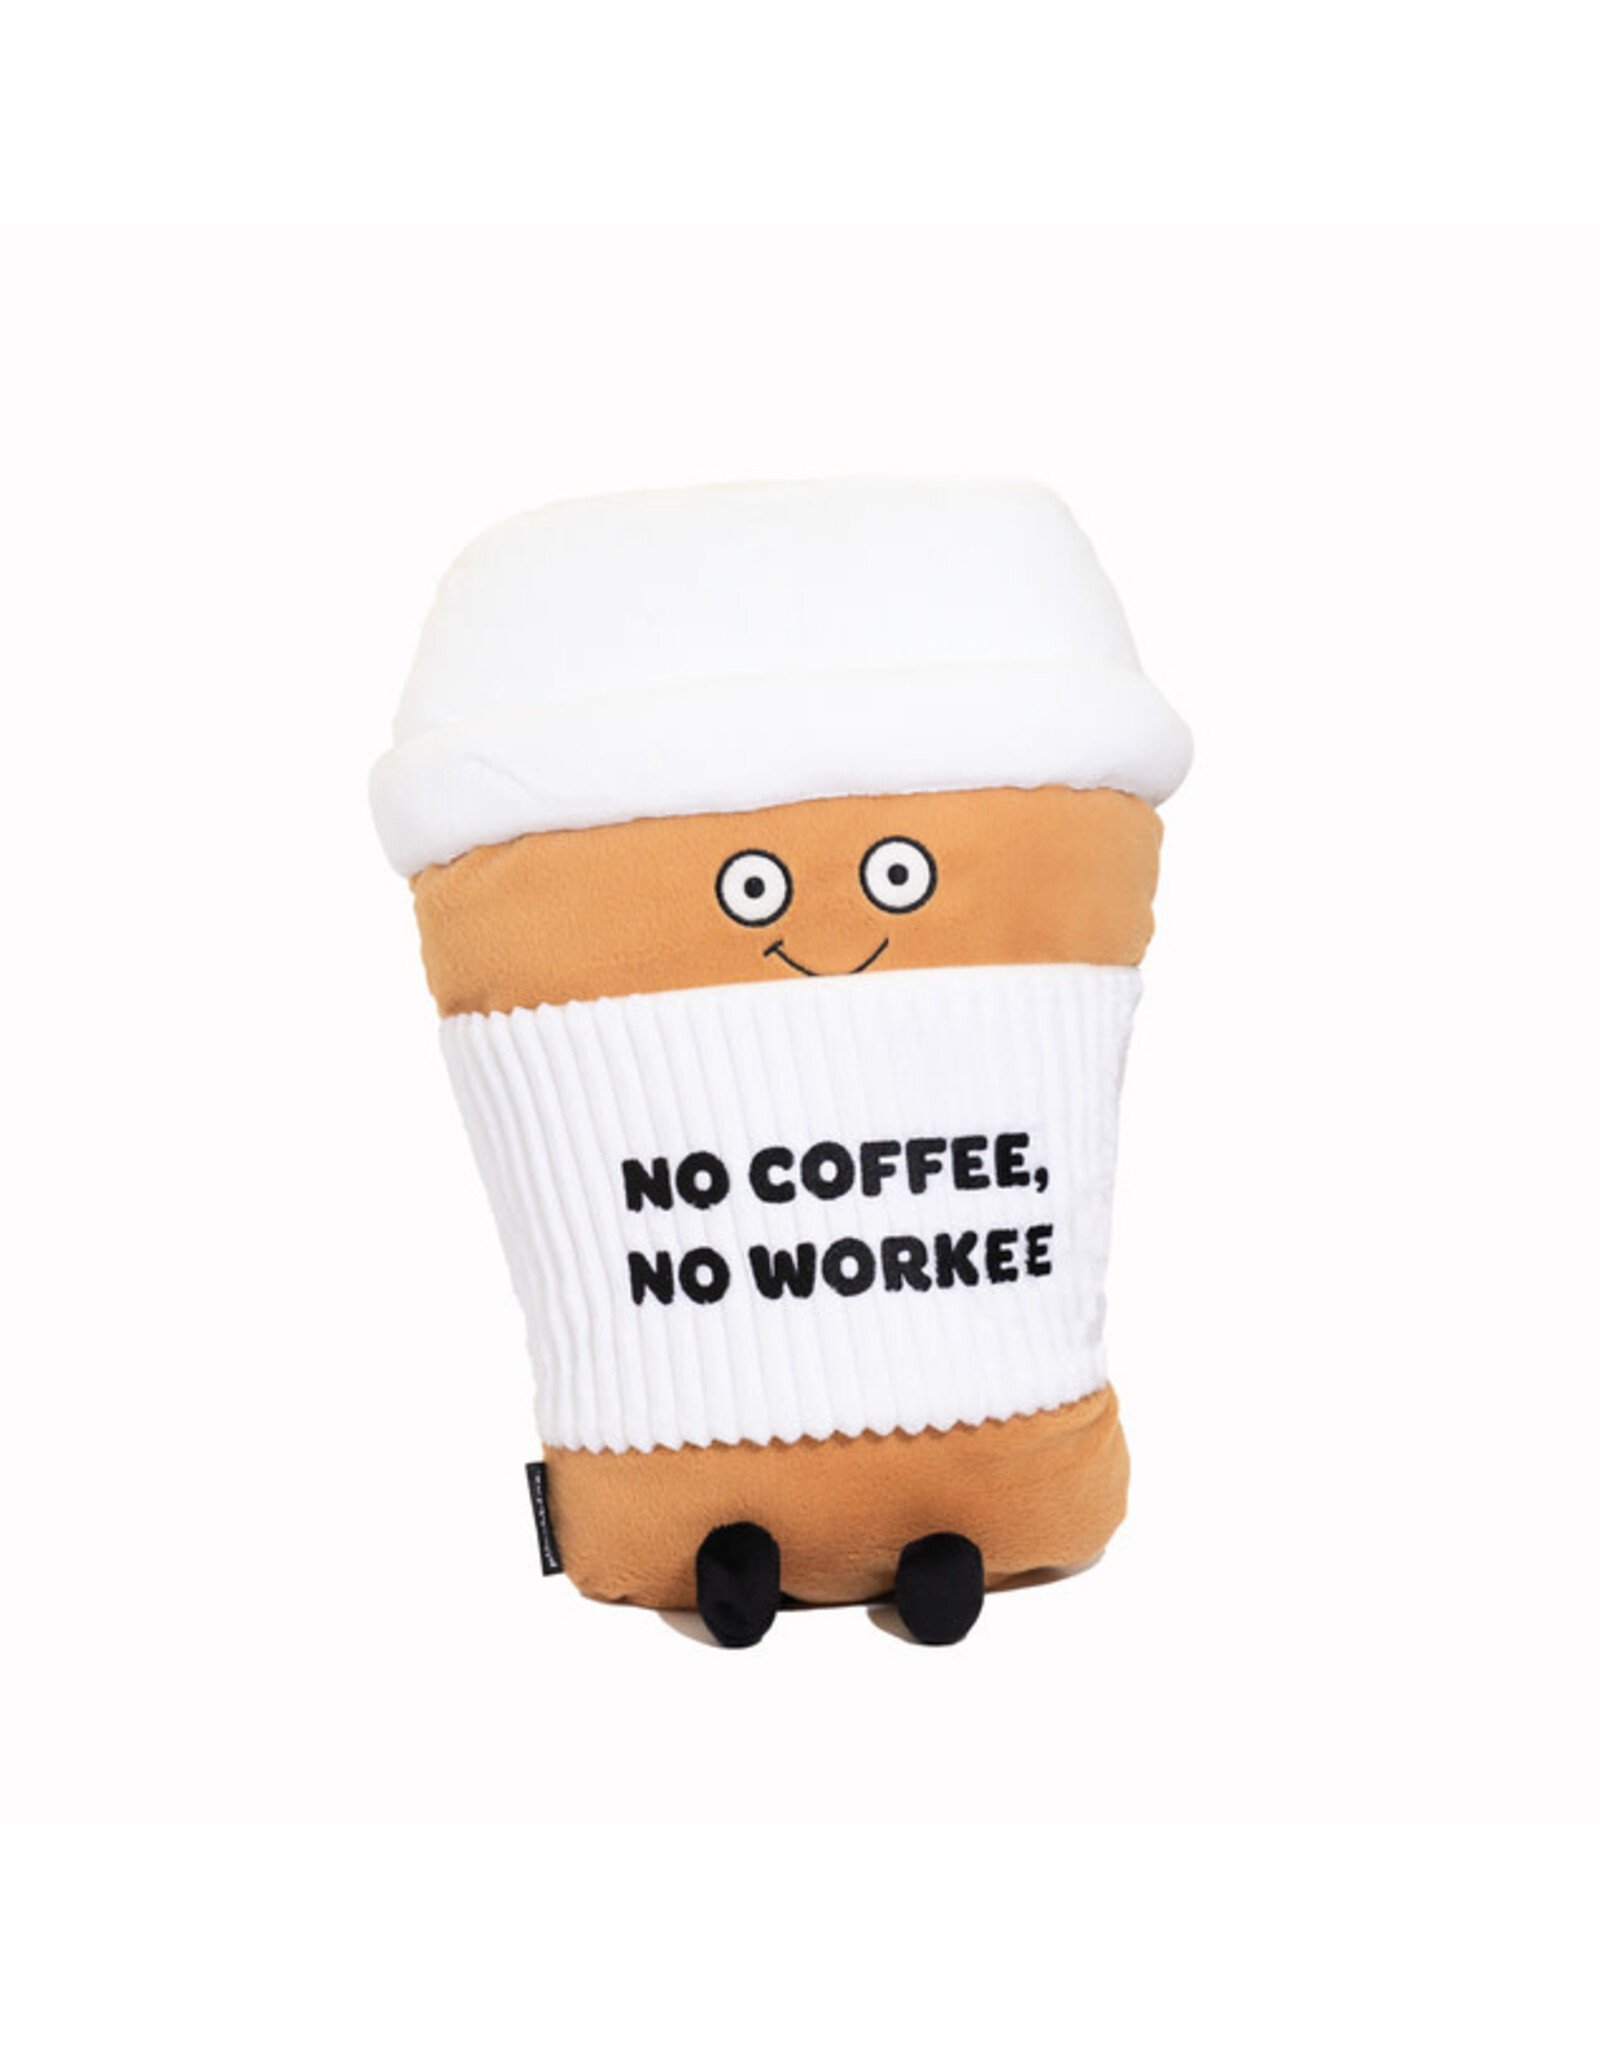 Punchkins Punchkins No Coffee No Workee Puffies XL Pillow